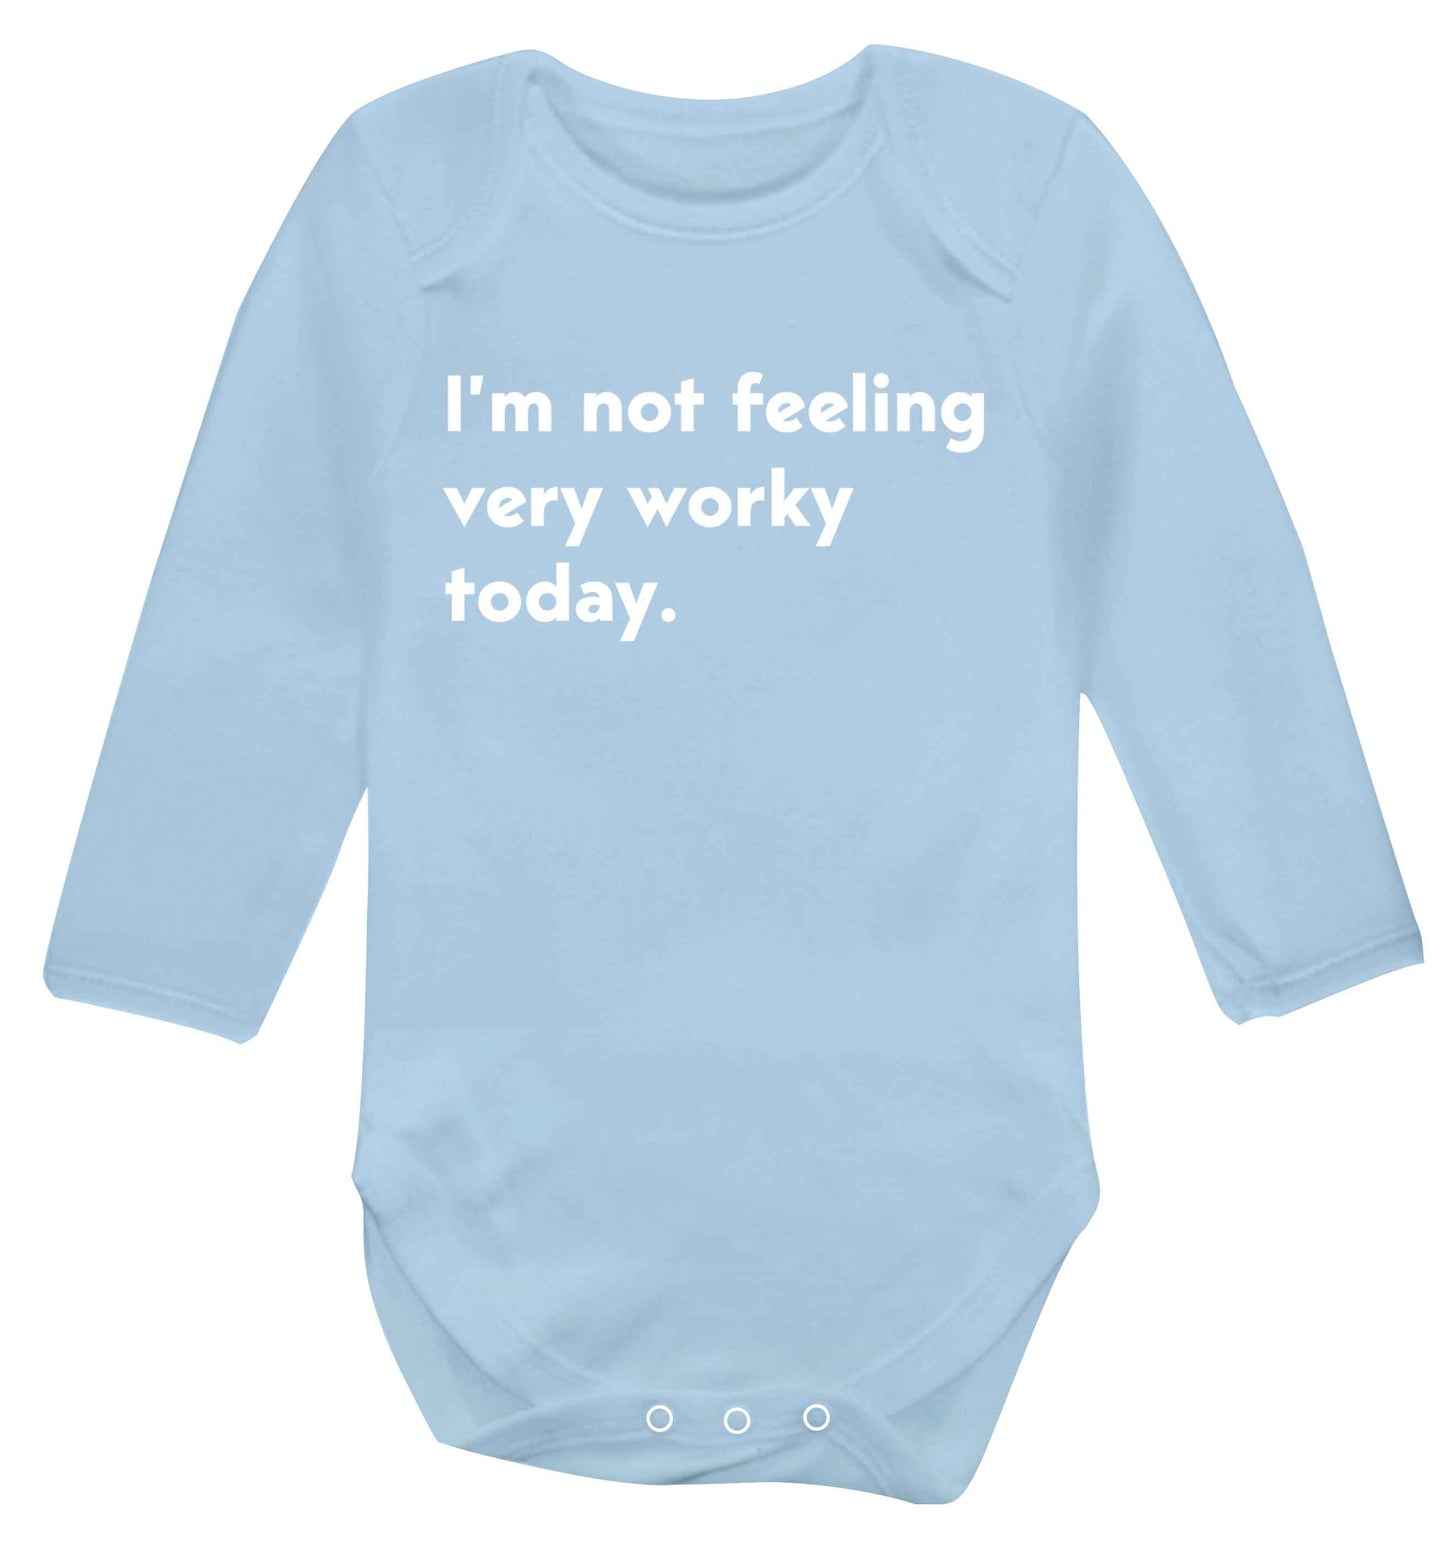 I'm not feeling very worky today Baby Vest long sleeved pale blue 6-12 months